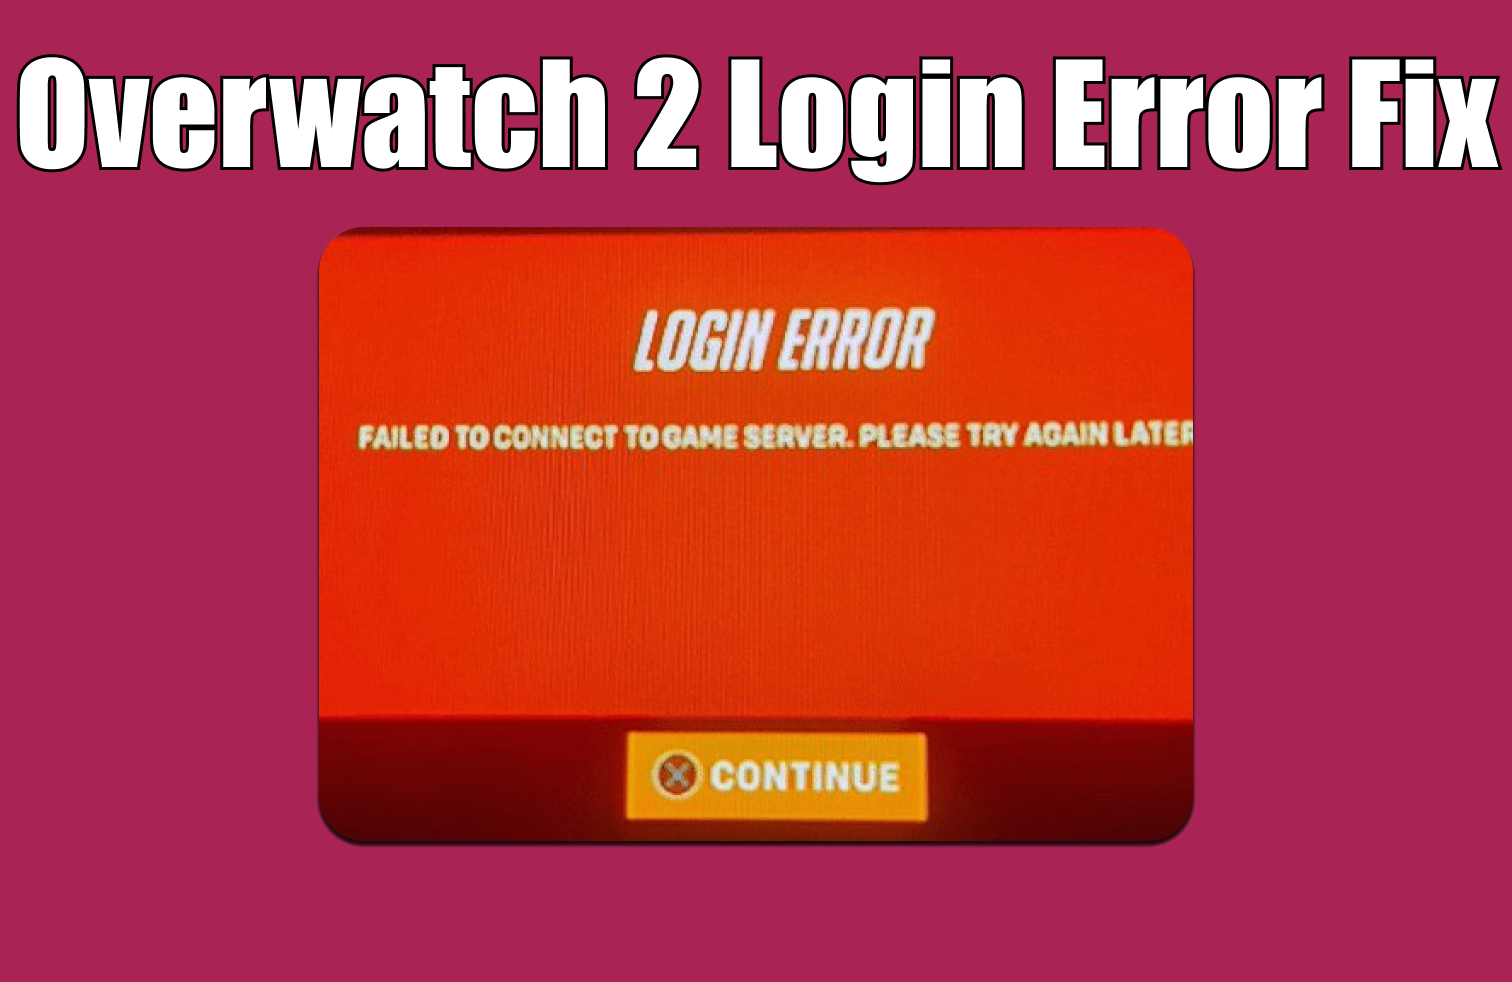 How to Fix Overwatch 2 Login Error "Failed to connect to Game Server